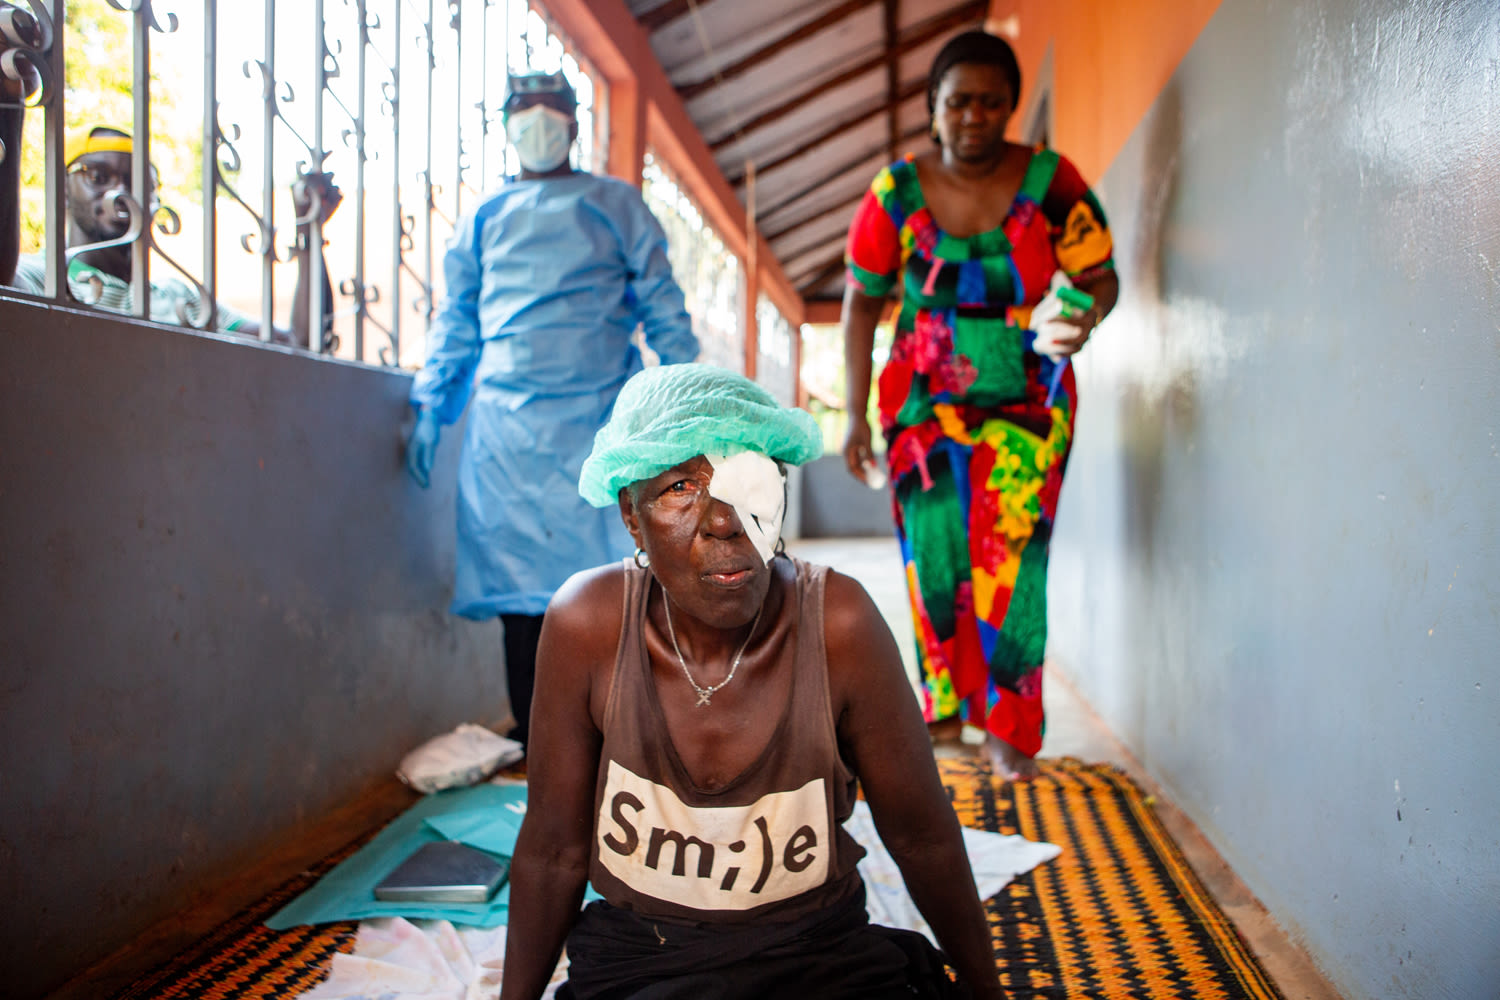 Nene sits up following trachoma surgery on the porch of her home while Forma,trachoma surgeon and his assistant Dionesa clean up from the surgery